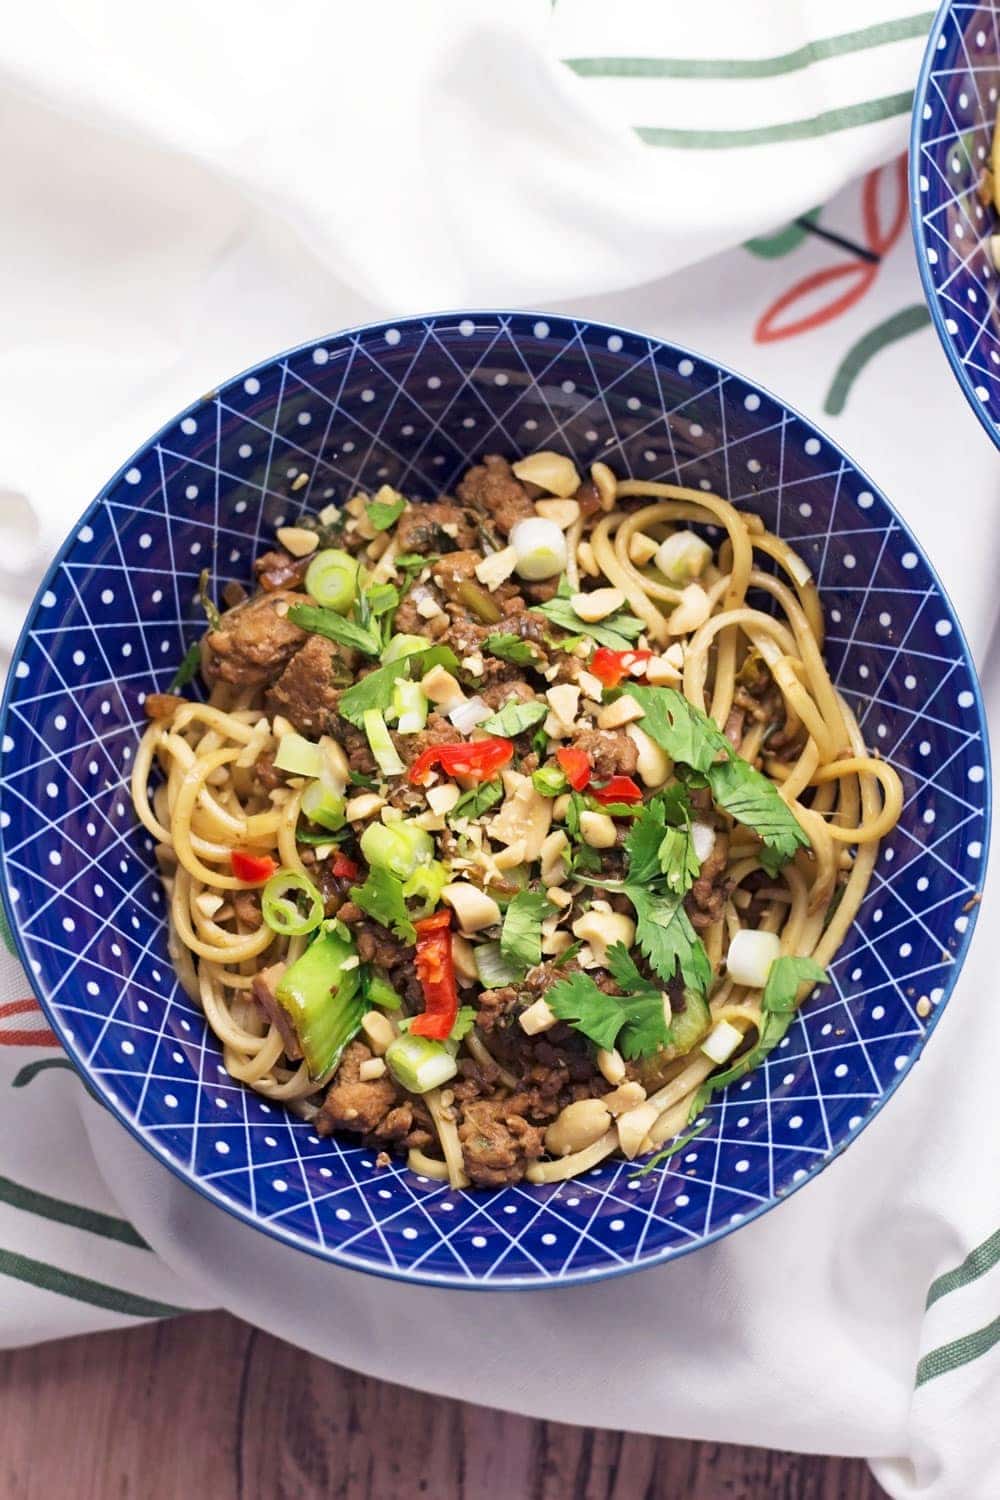 These spicy pork mince noodles are your next easy weeknight recipe! Have dinner on the table in less than half an hour and serve a meal with a kick.